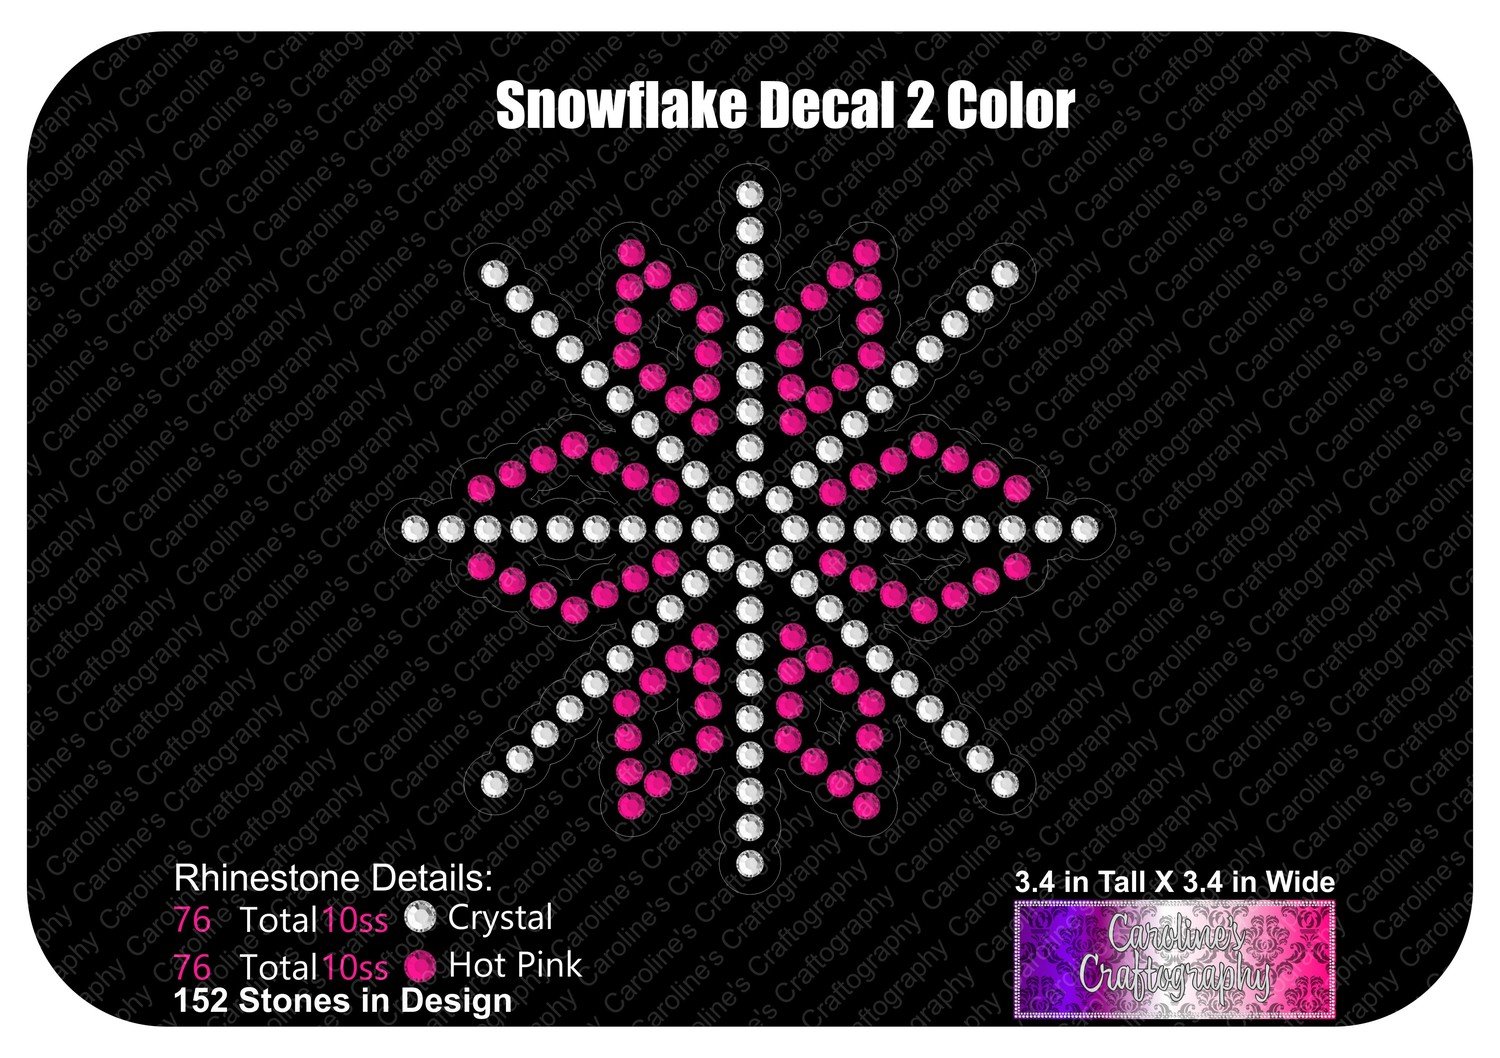 Snowflake 2 Color Decal Stone